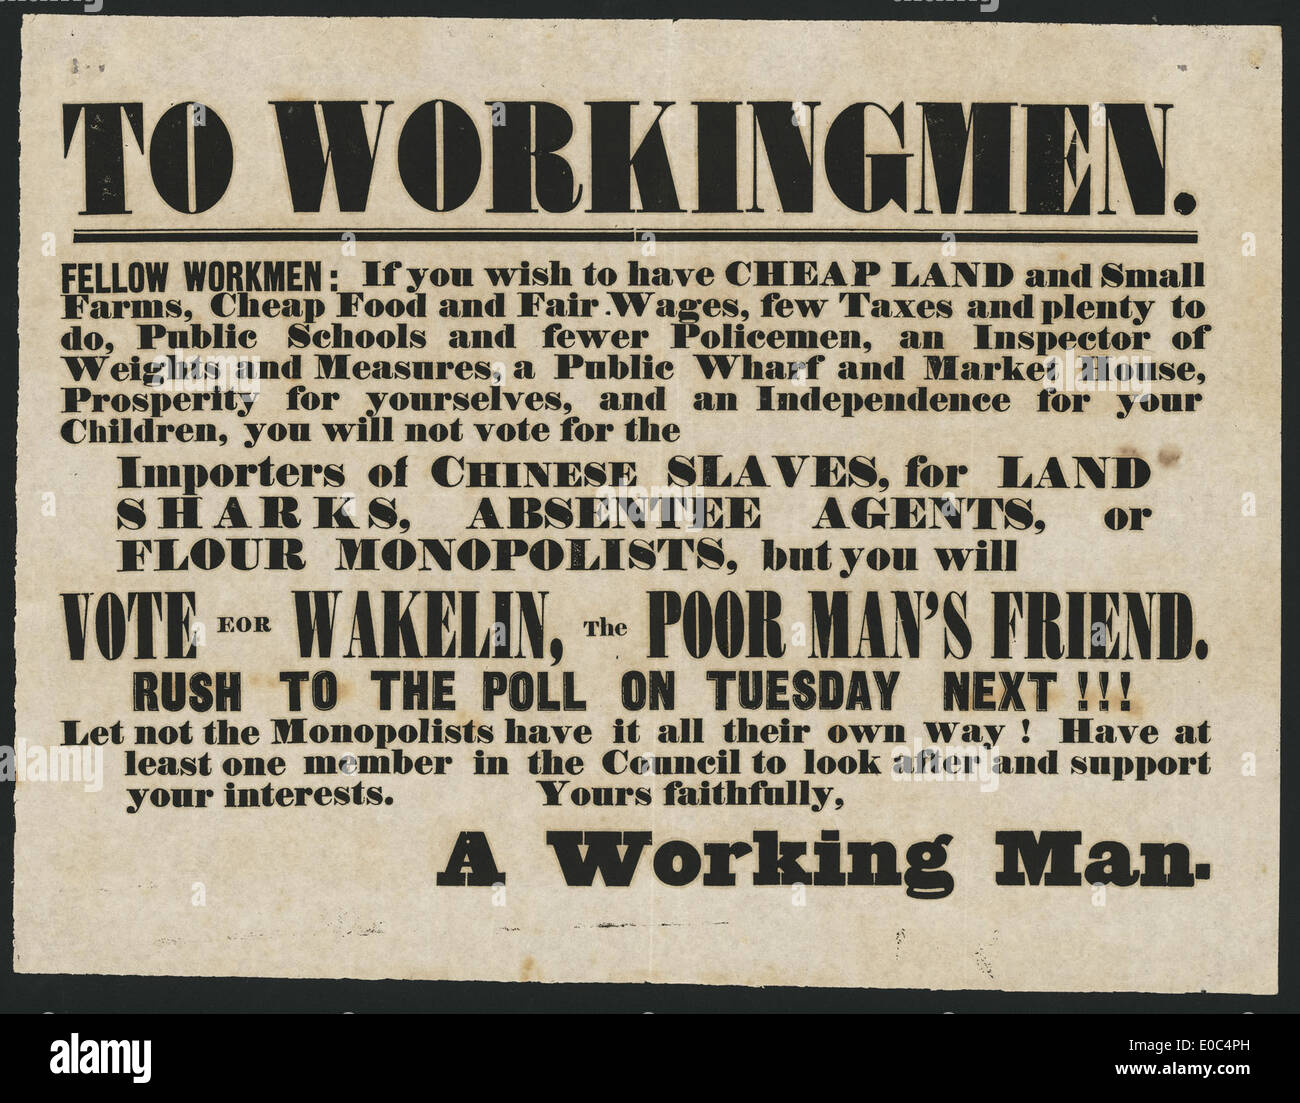 To workingmen. Fellow workmen - If you wish to have cheap land and small farms, cheap food and fair wages, few taxes and plenty to do ... you will vote for Wakelin, the poor man's friend. Rush to the poll on Tuesday next!!! [ca 1853]. Stock Photo